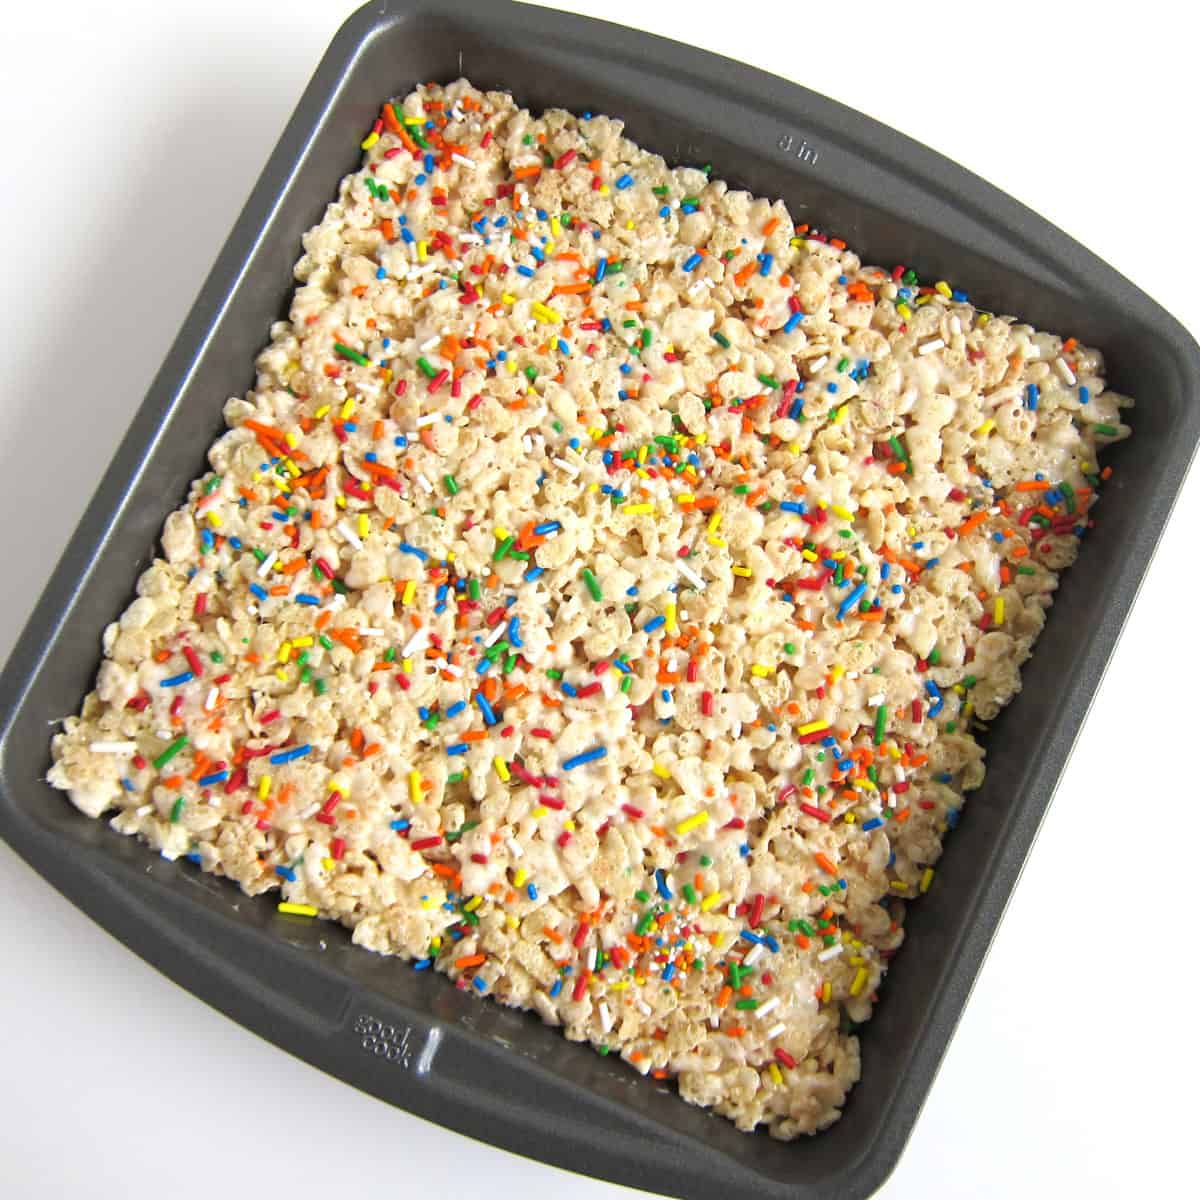 8-inch square pan filled with rainbow sprinkle rice crispy treats